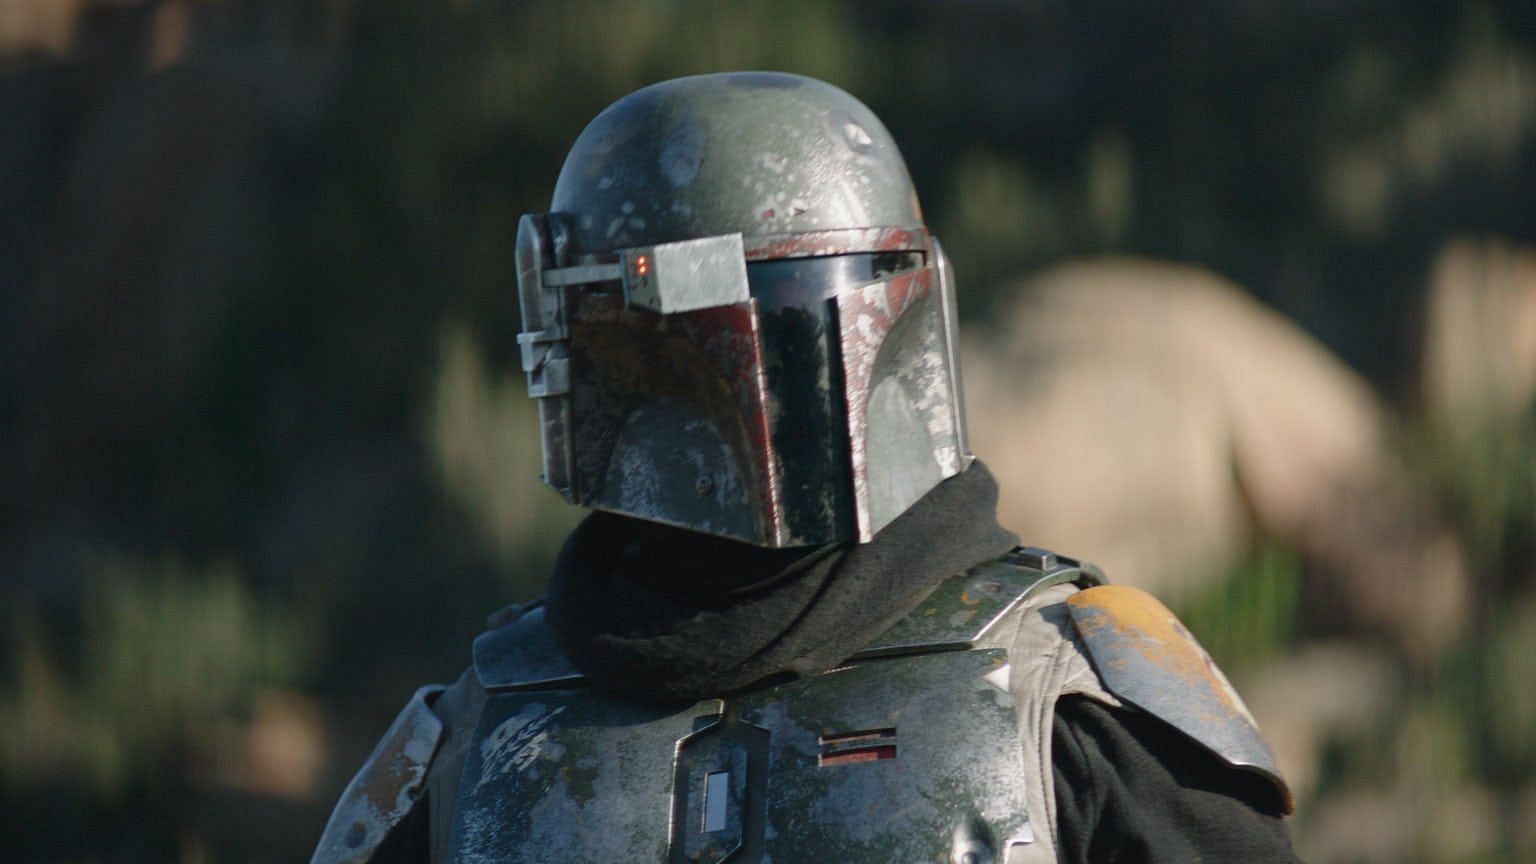 Boba Fett is a skilled bounty hunter and feared warrior (Image via Lucasfilm)